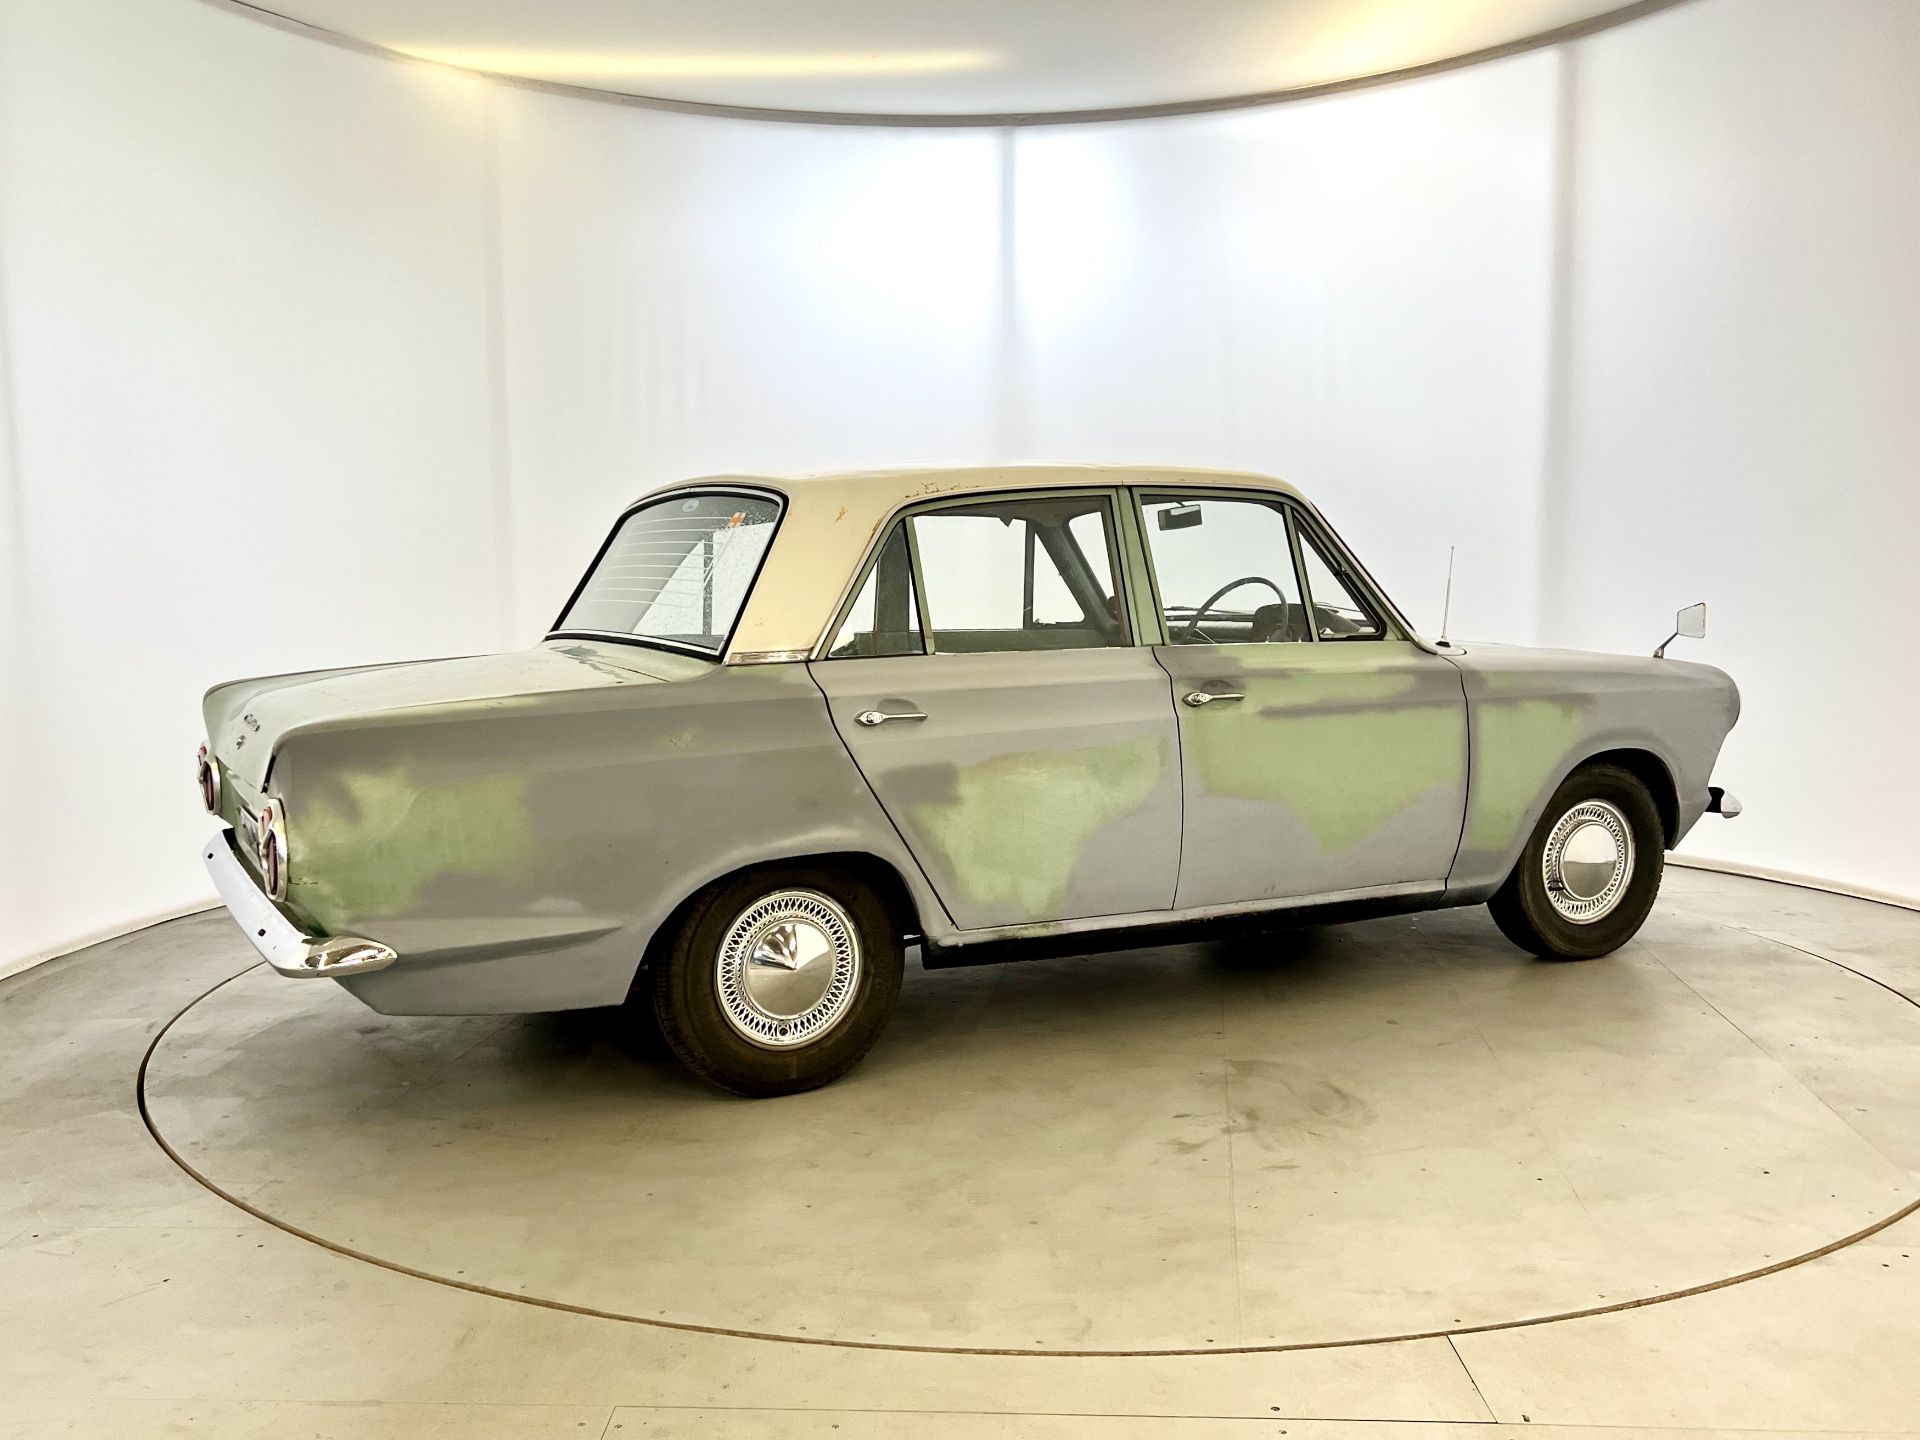 Ford Cortina Deluxe - Image 10 of 31